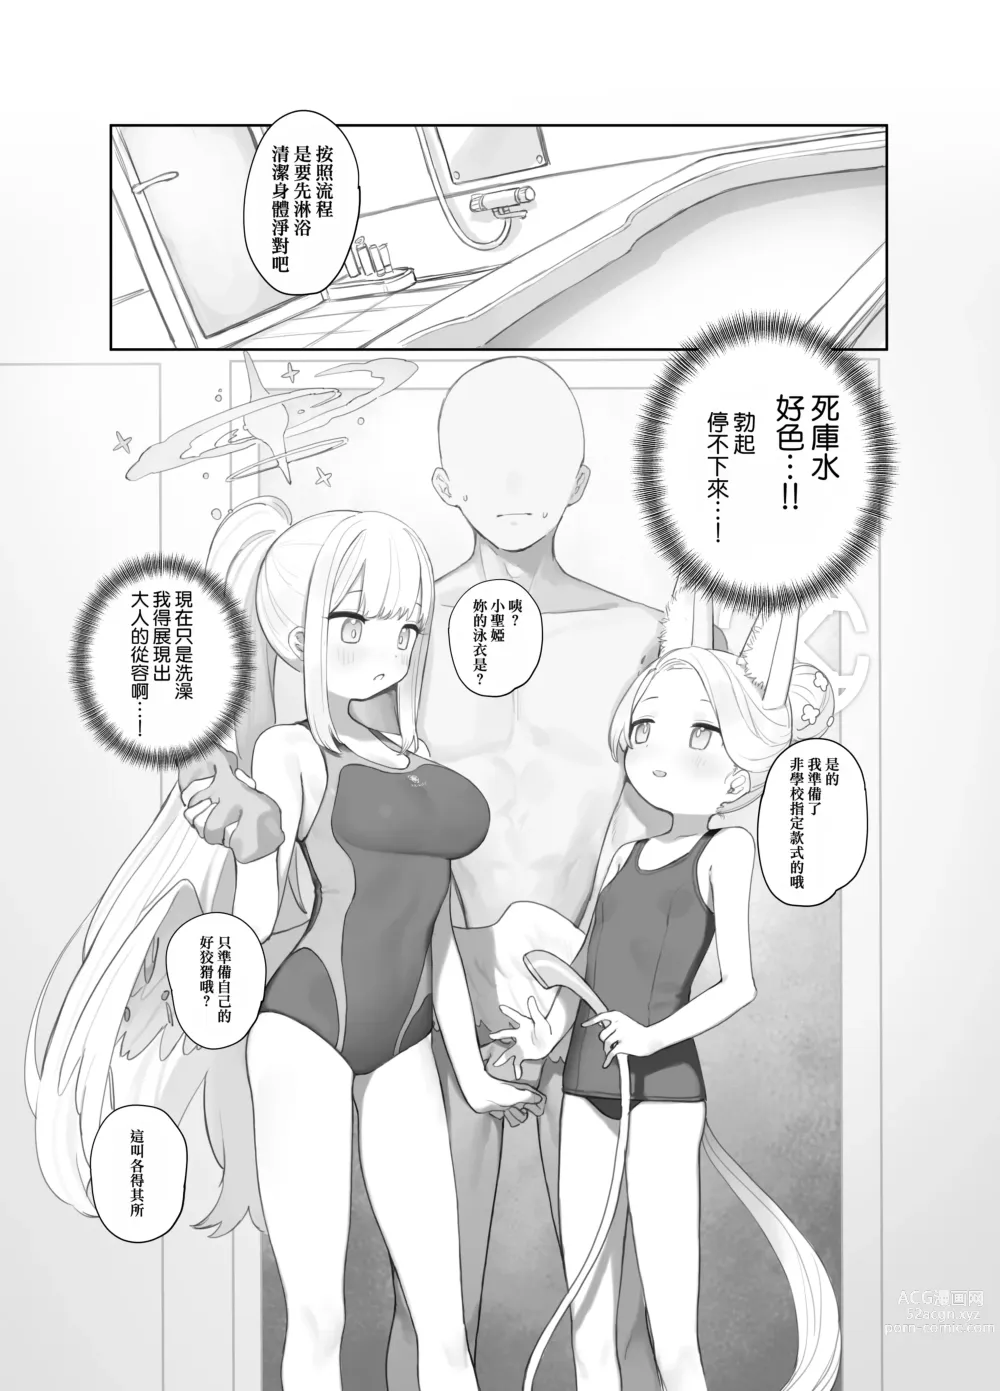 Page 8 of doujinshi 伊甸條約的善後處理 (decensored)